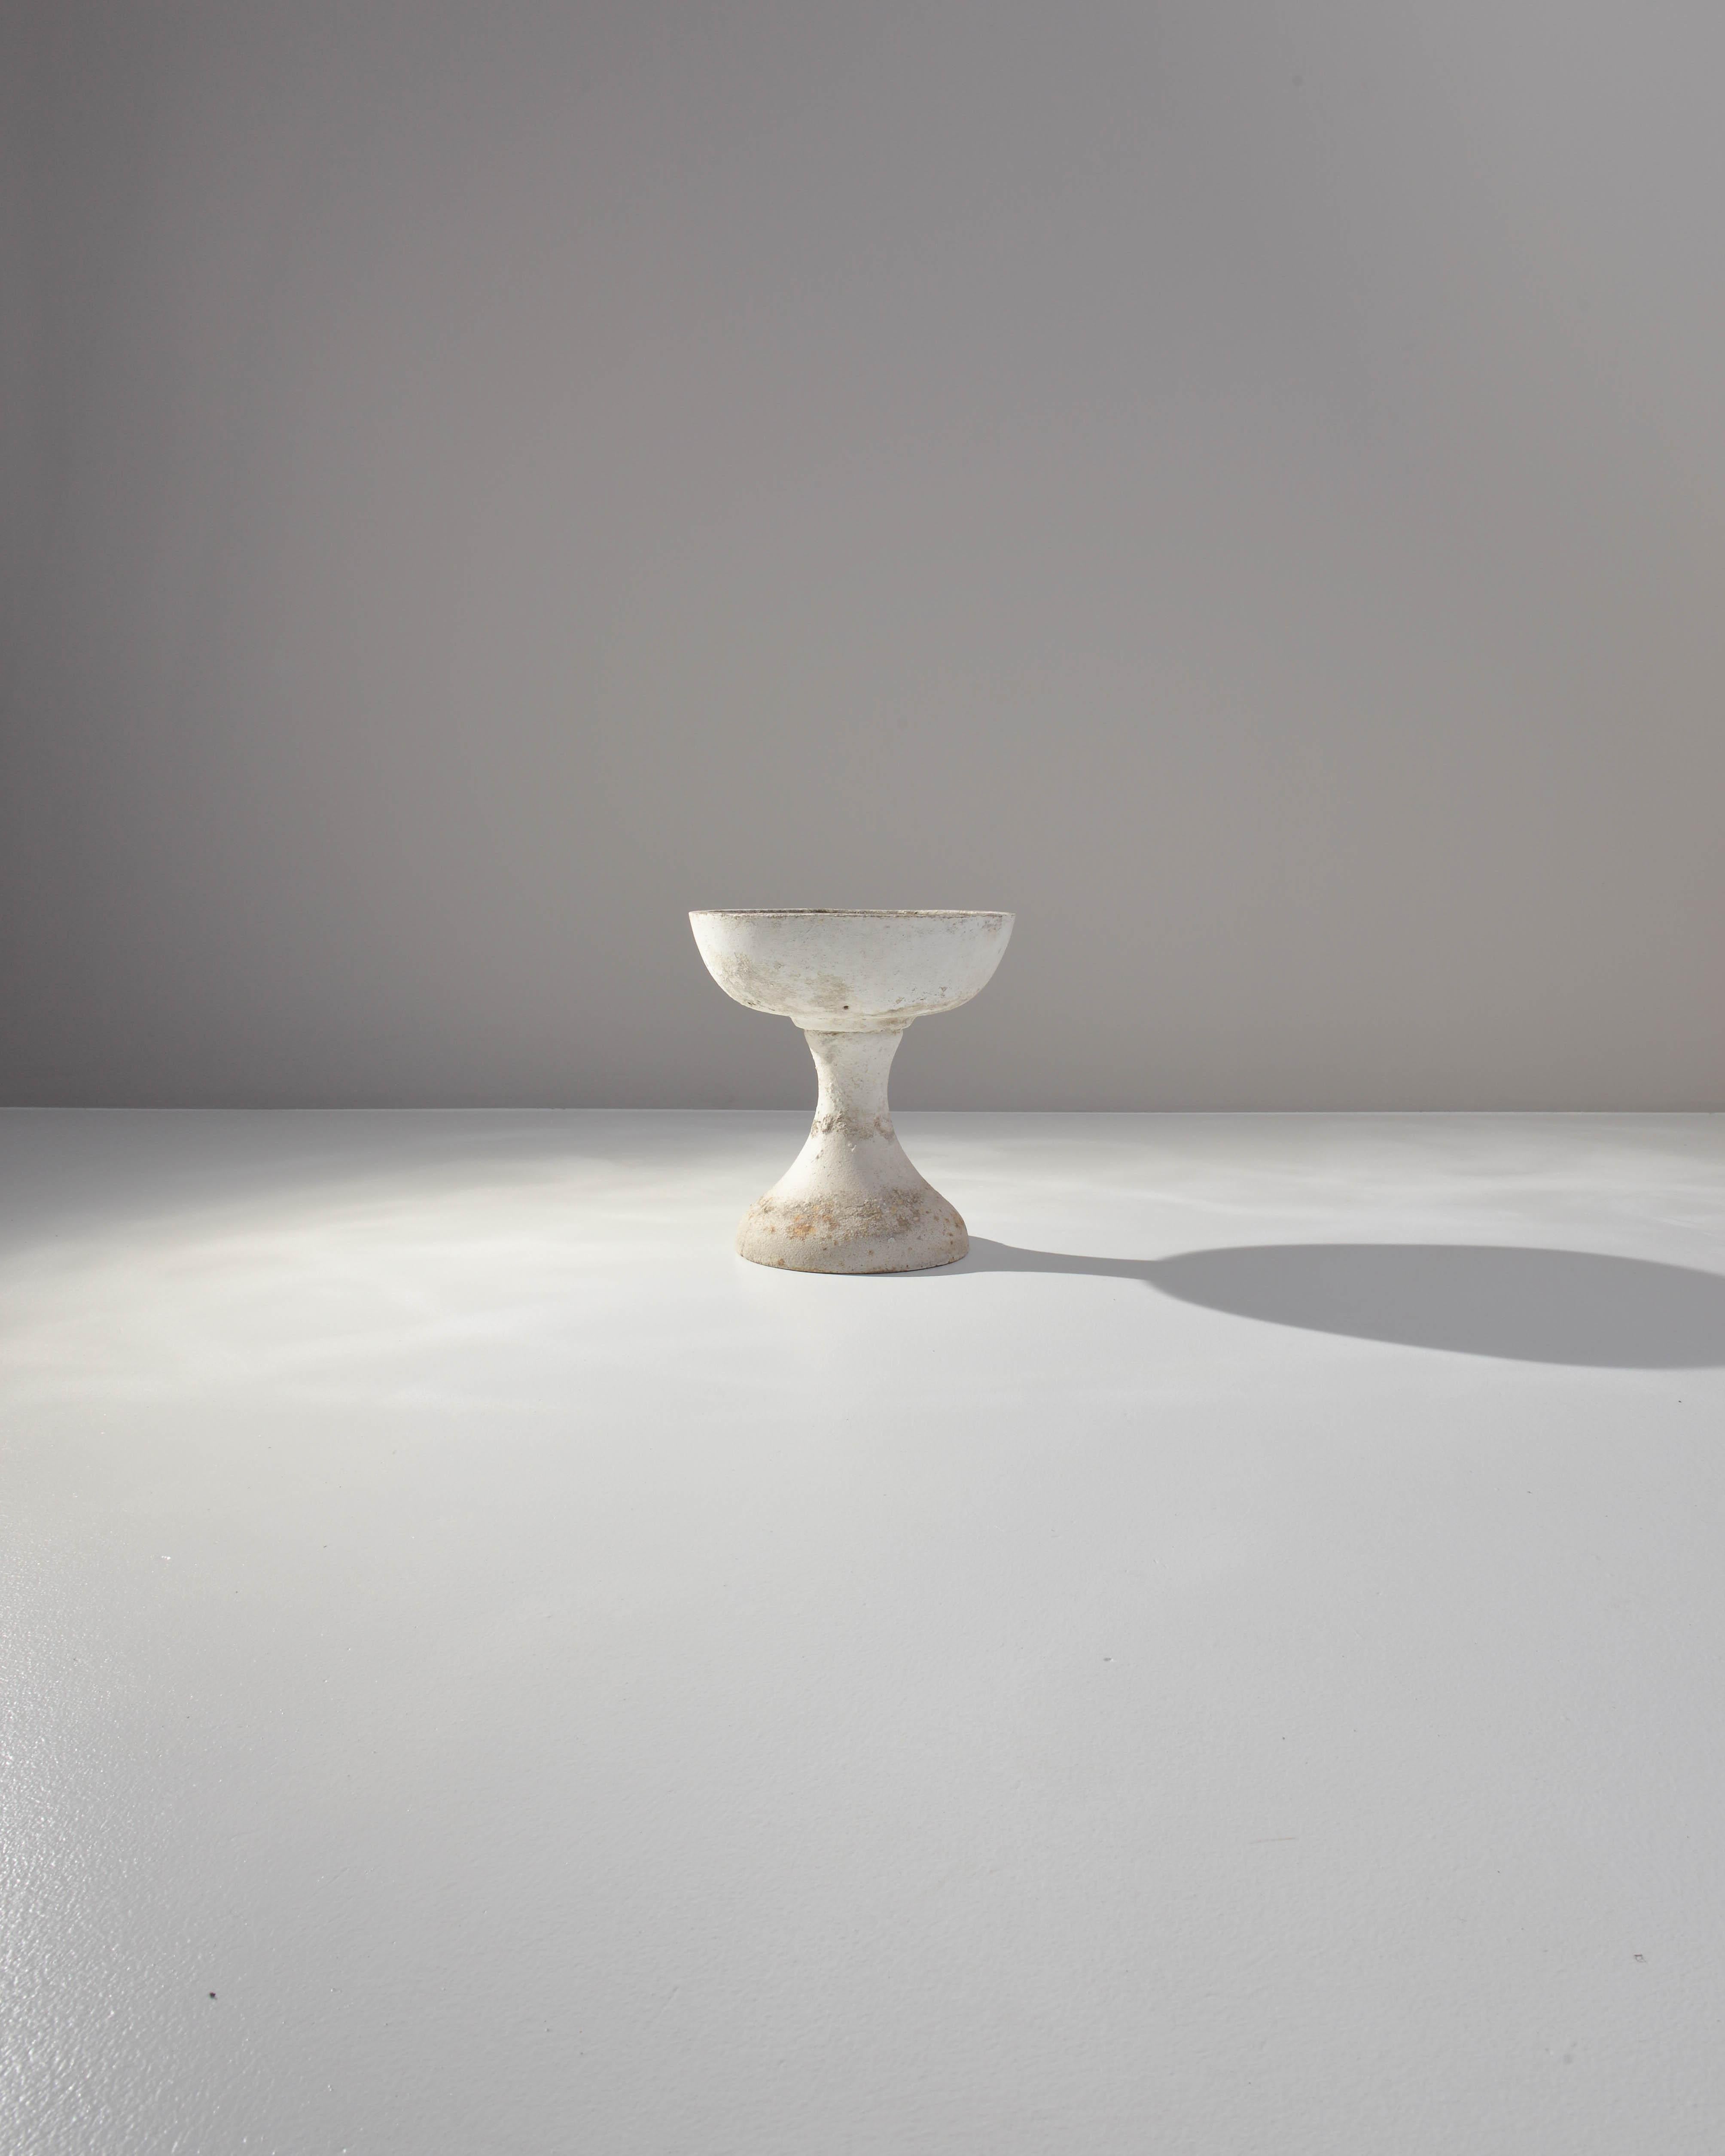 A concrete planter from France, produced in 1960. A deep bowl made from white patinated concrete set on a short stand like a chalice or champagne coup of the gods. Wear in original patination shows long life lived out of doors, absorbing rays from